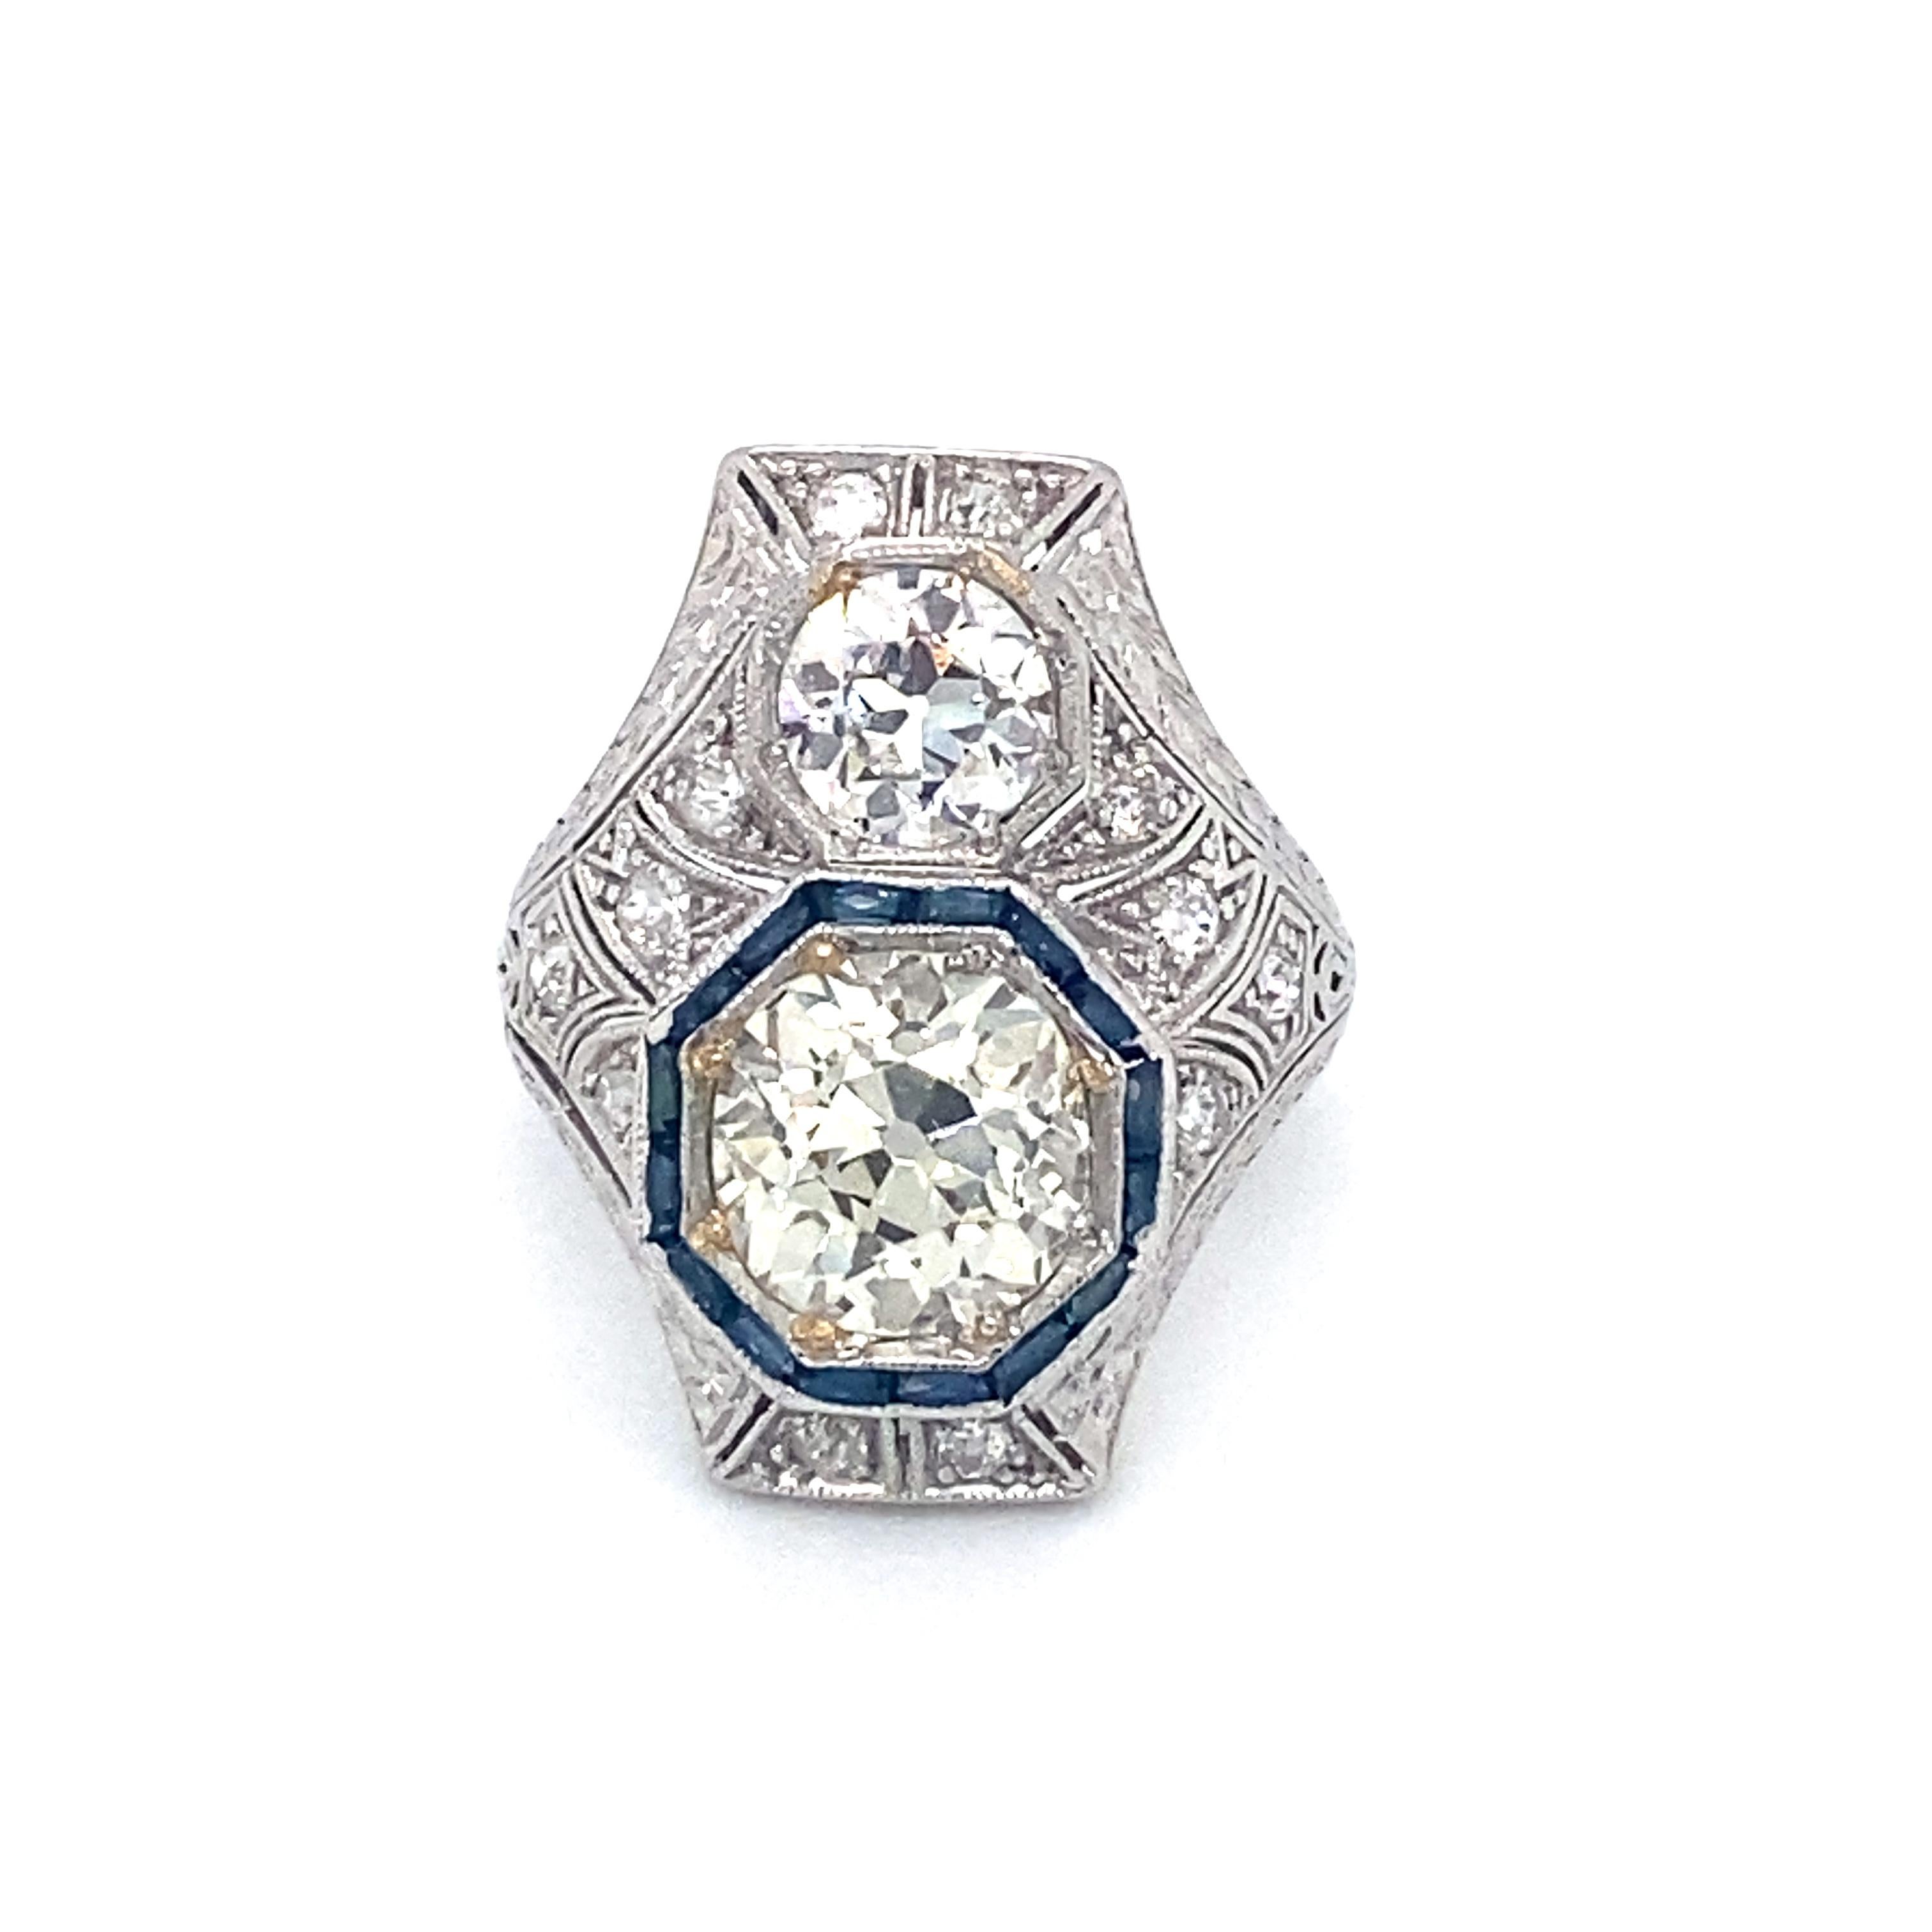 1920s Art Deco 3.70 Carat Total Diamond and Sapphire Cocktail Ring in Platinum For Sale 1